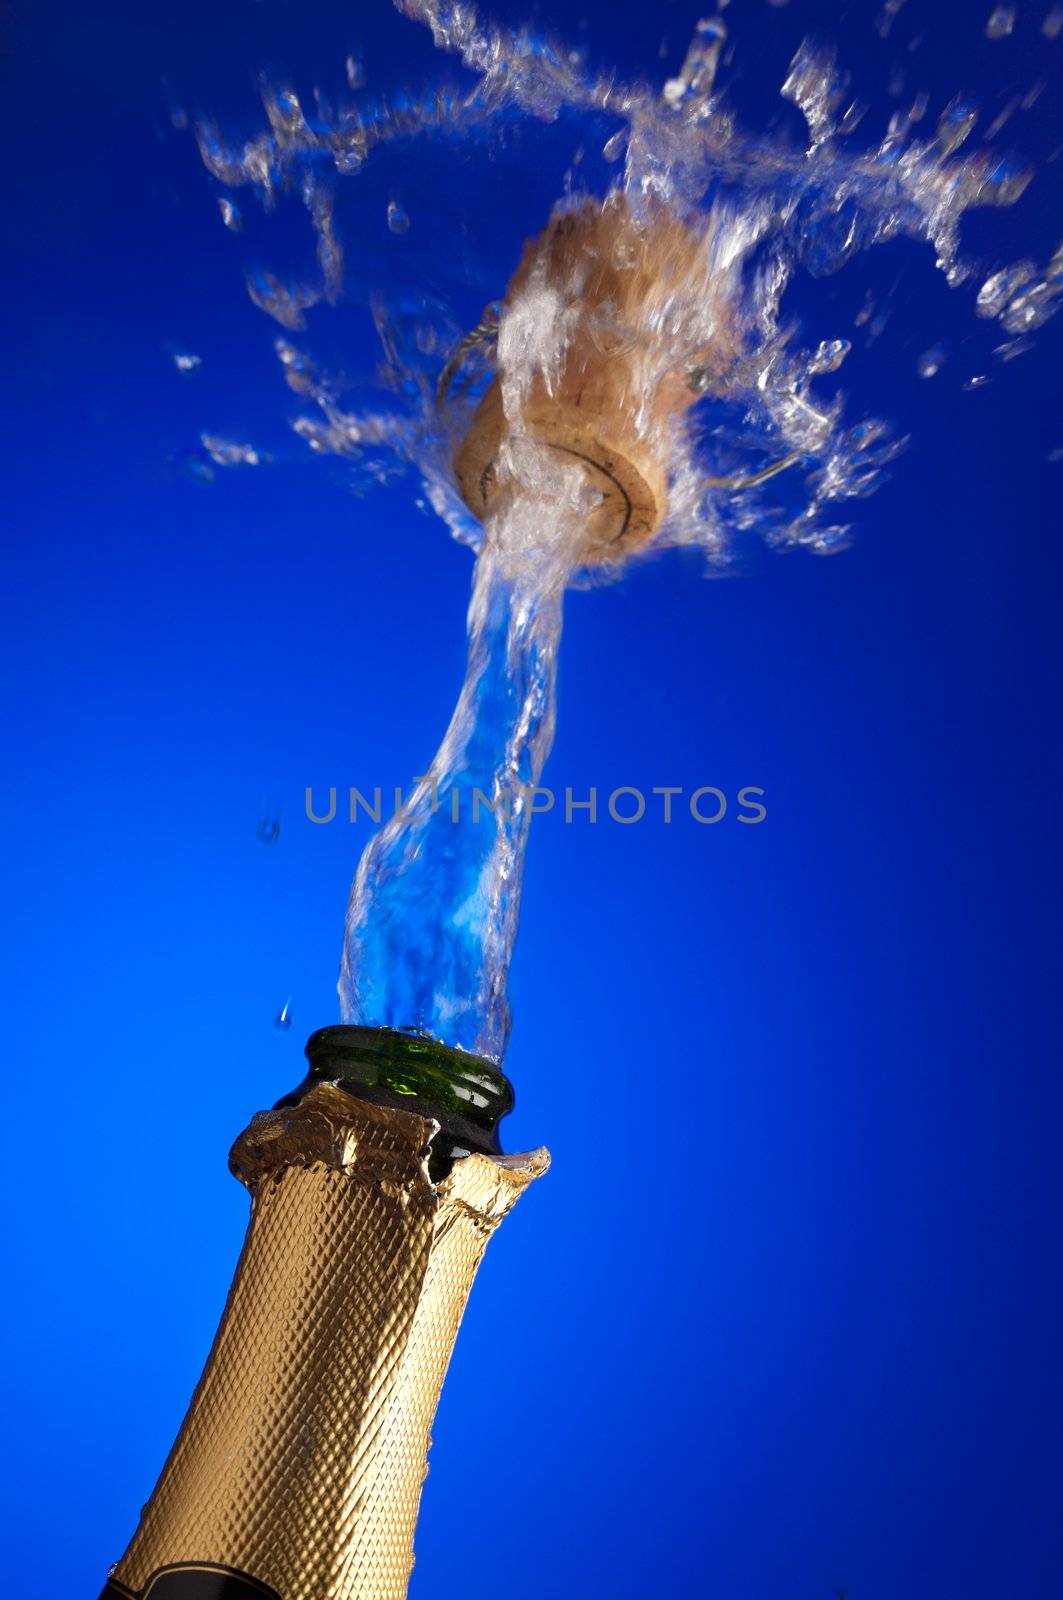 clos-up of an uncorked champagne bottle with cork flying away on the liquid